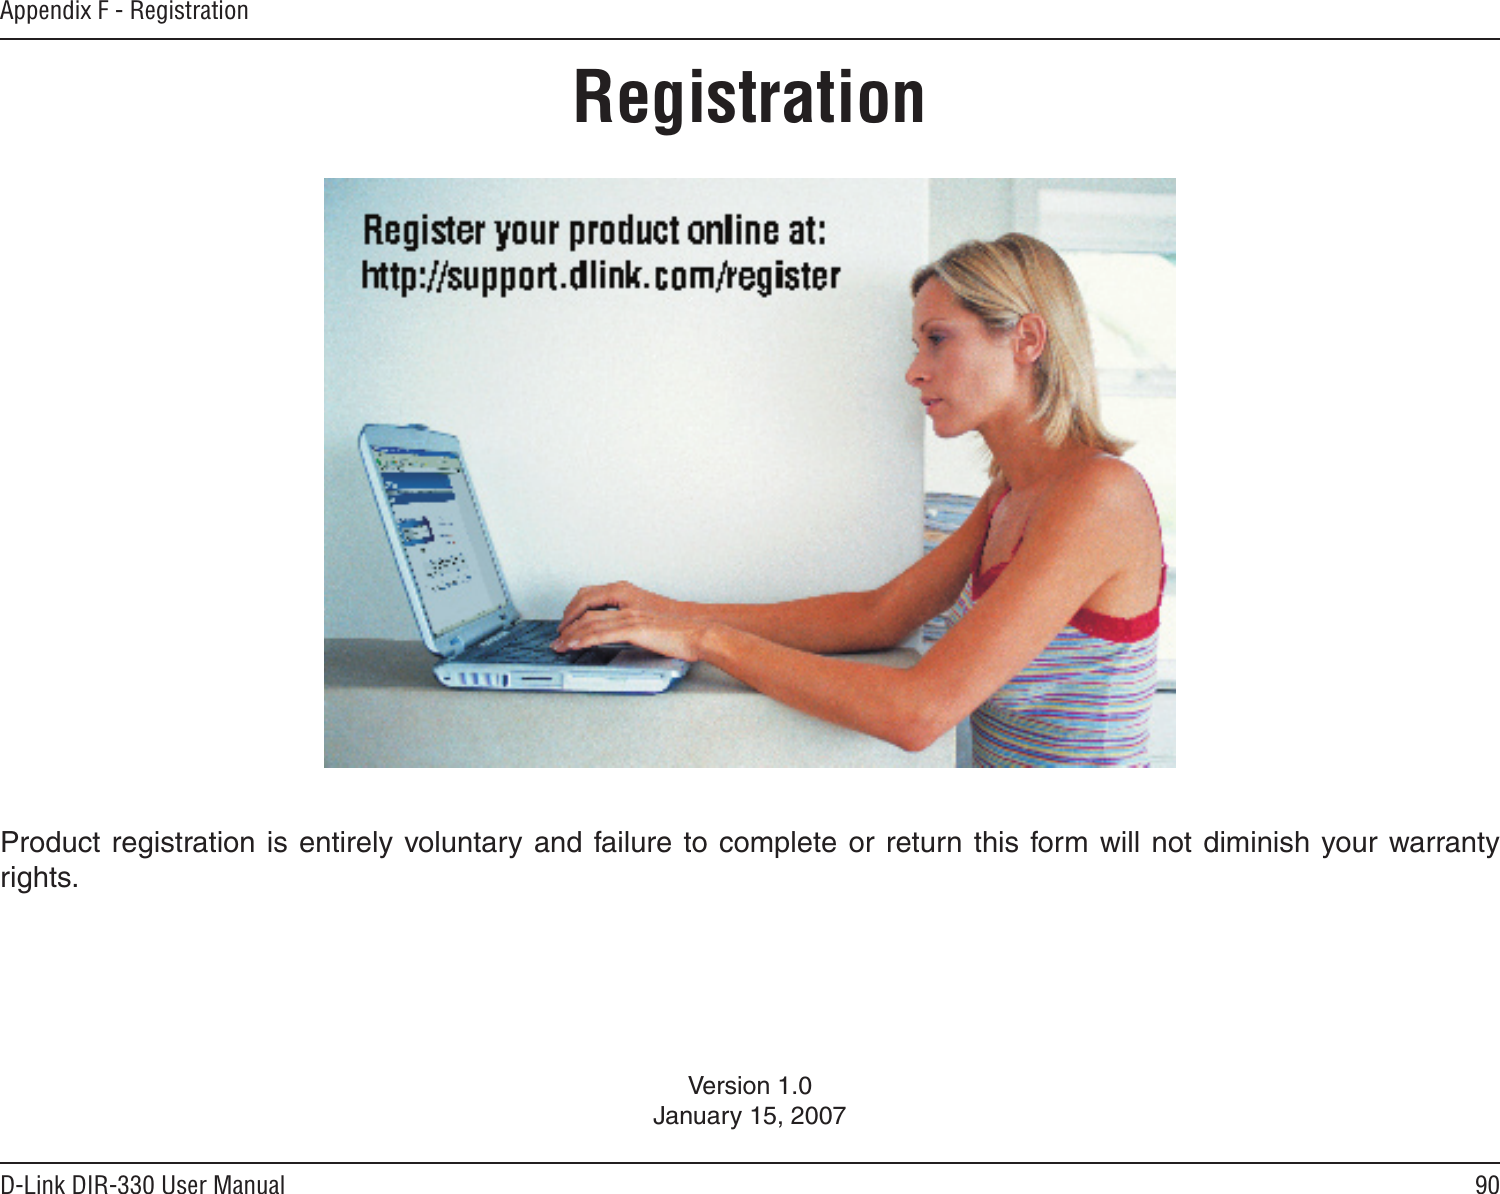 90D-Link DIR-330 User ManualAppendix F - RegistrationVersion 1.0January 15, 2007Product registration is entirely voluntary and failure  to complete  or return  this form will  not diminish your warranty rights.Registration